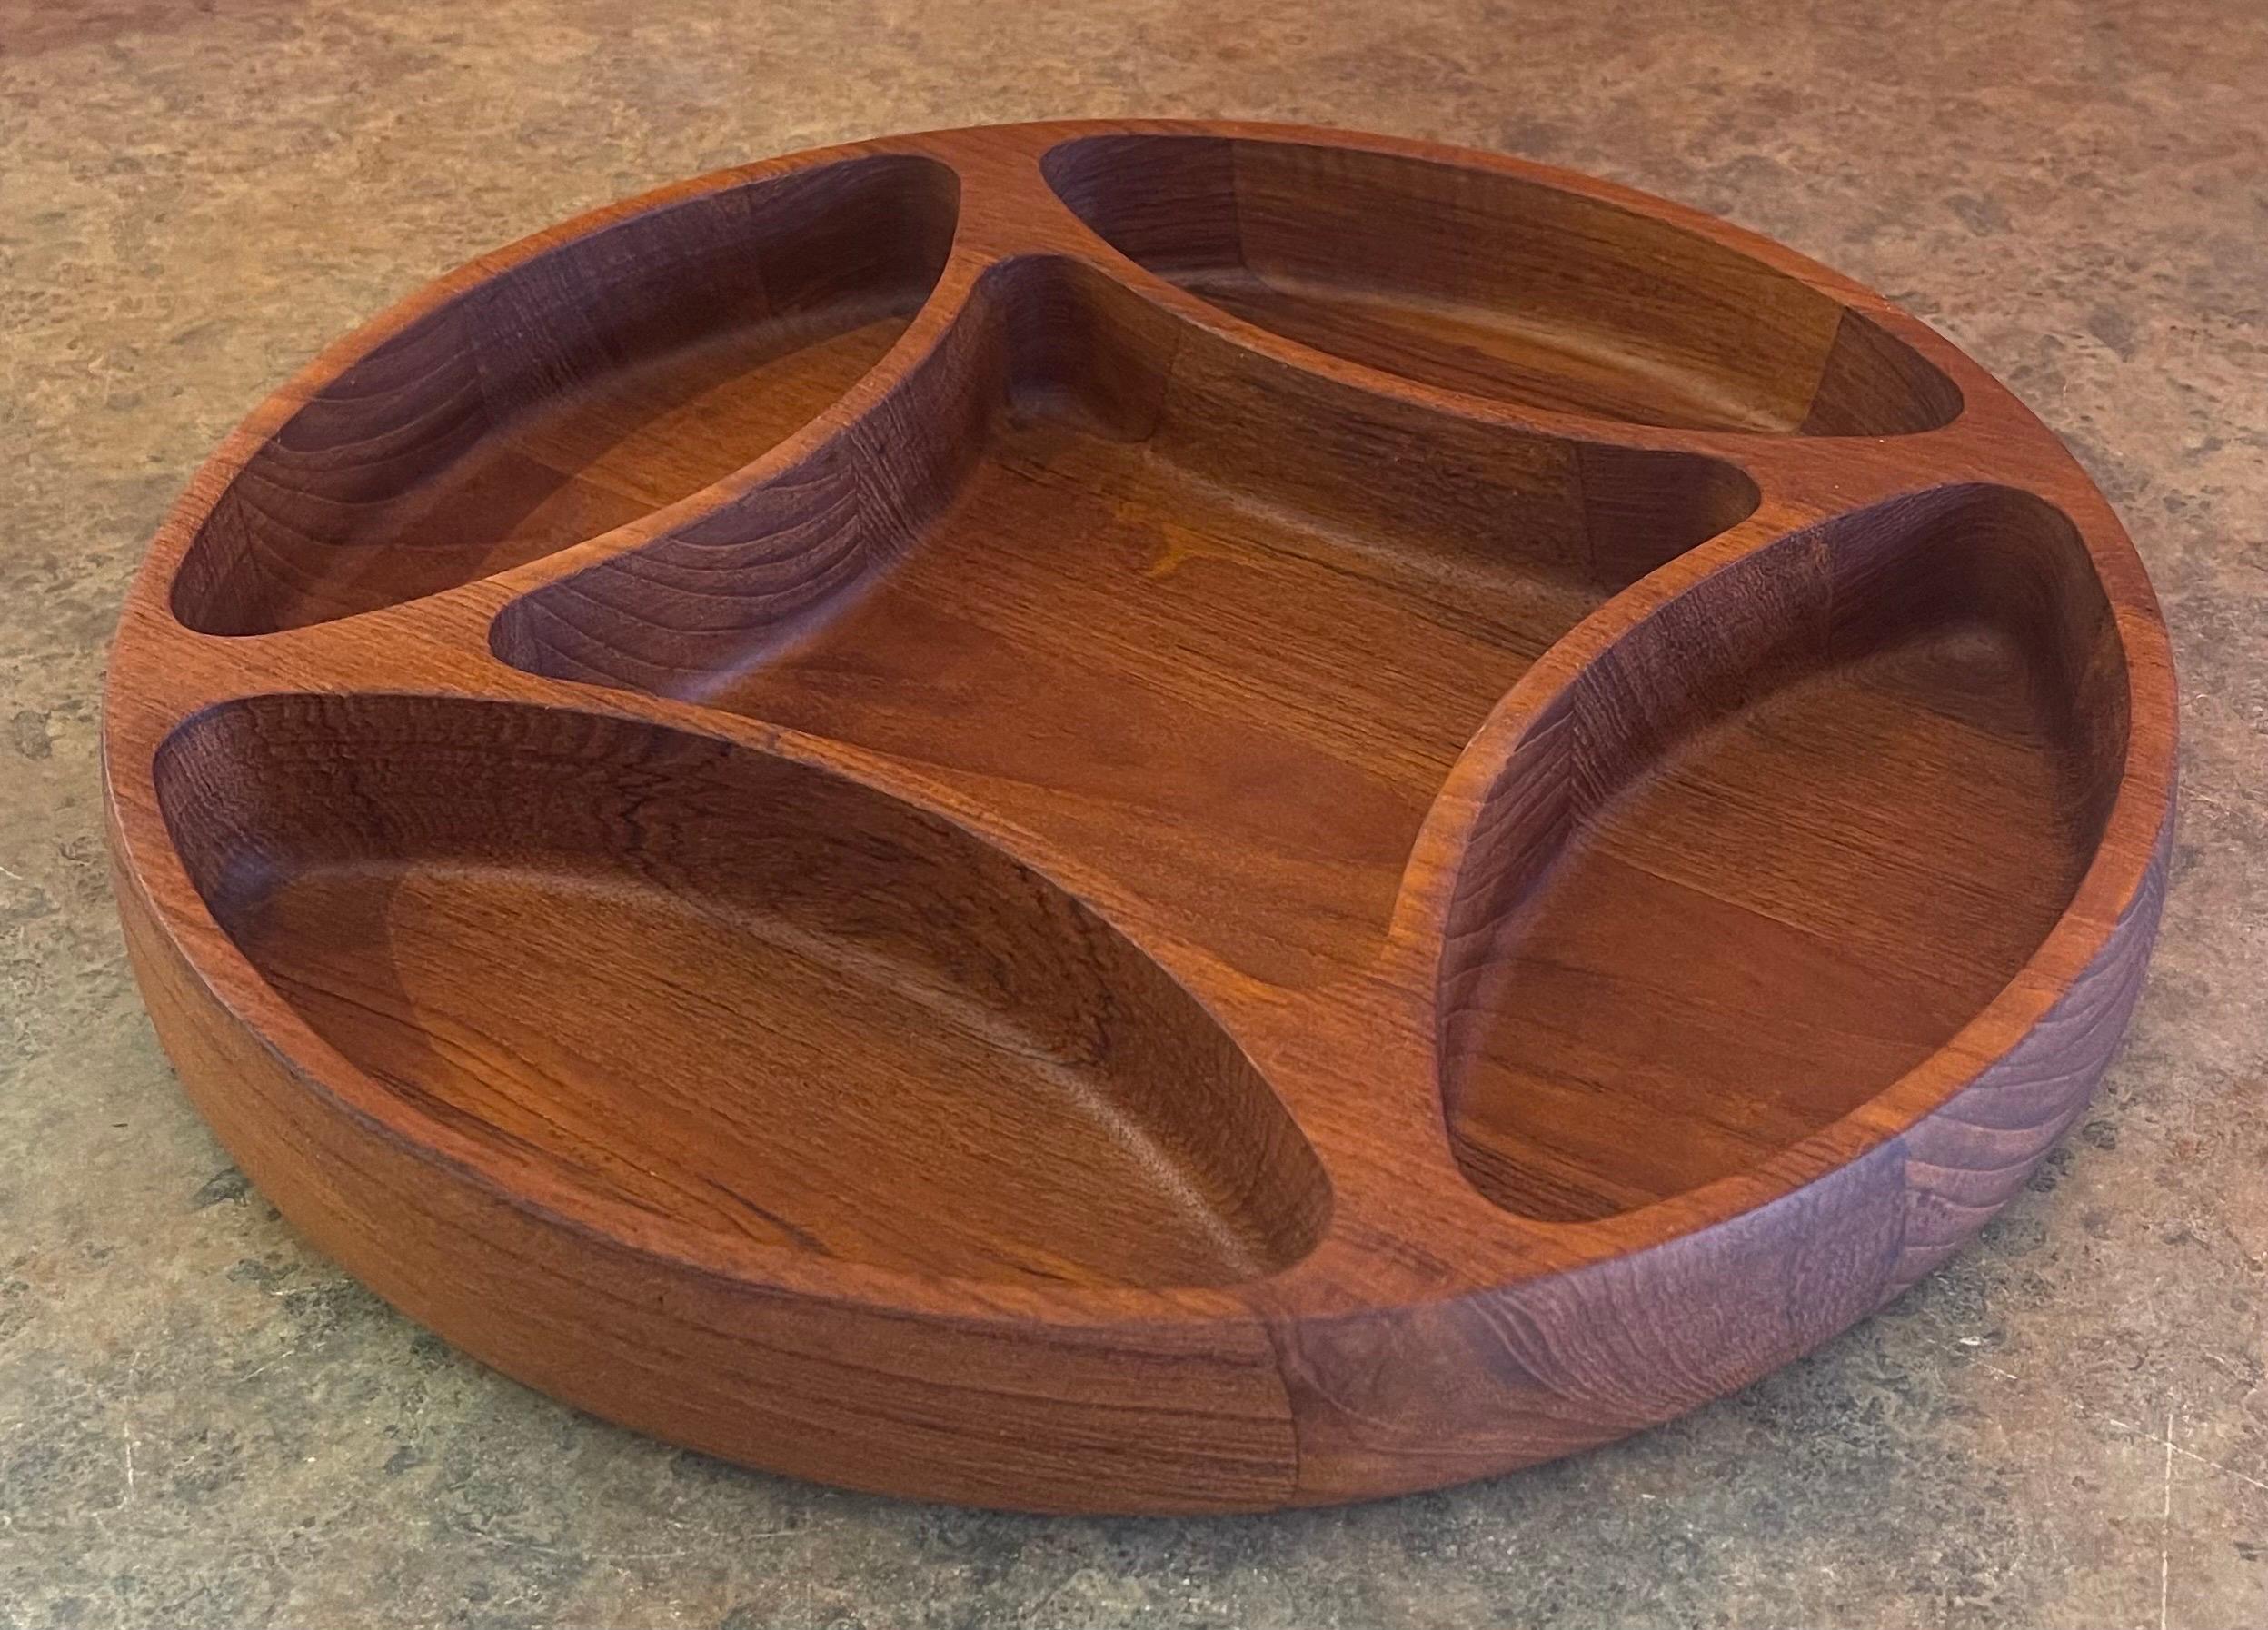 Large Divided Bowl / Tray in Teak by Jens Quistgaard for Dansk In Good Condition For Sale In San Diego, CA